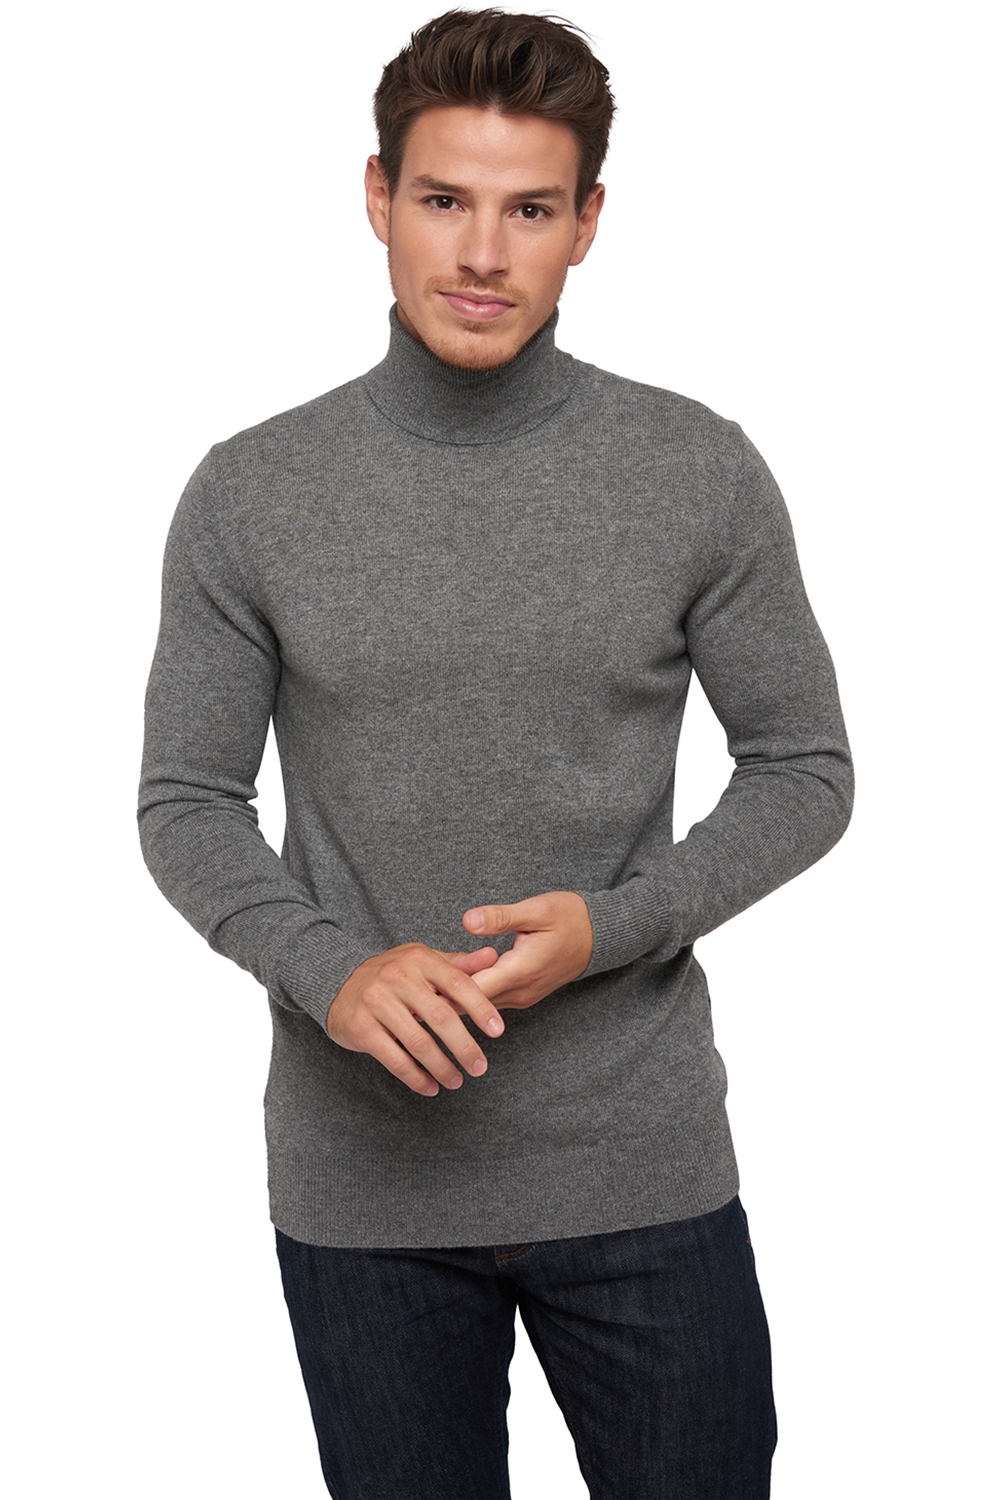 Cashmere men basic sweaters at low prices tarry first grey marl m